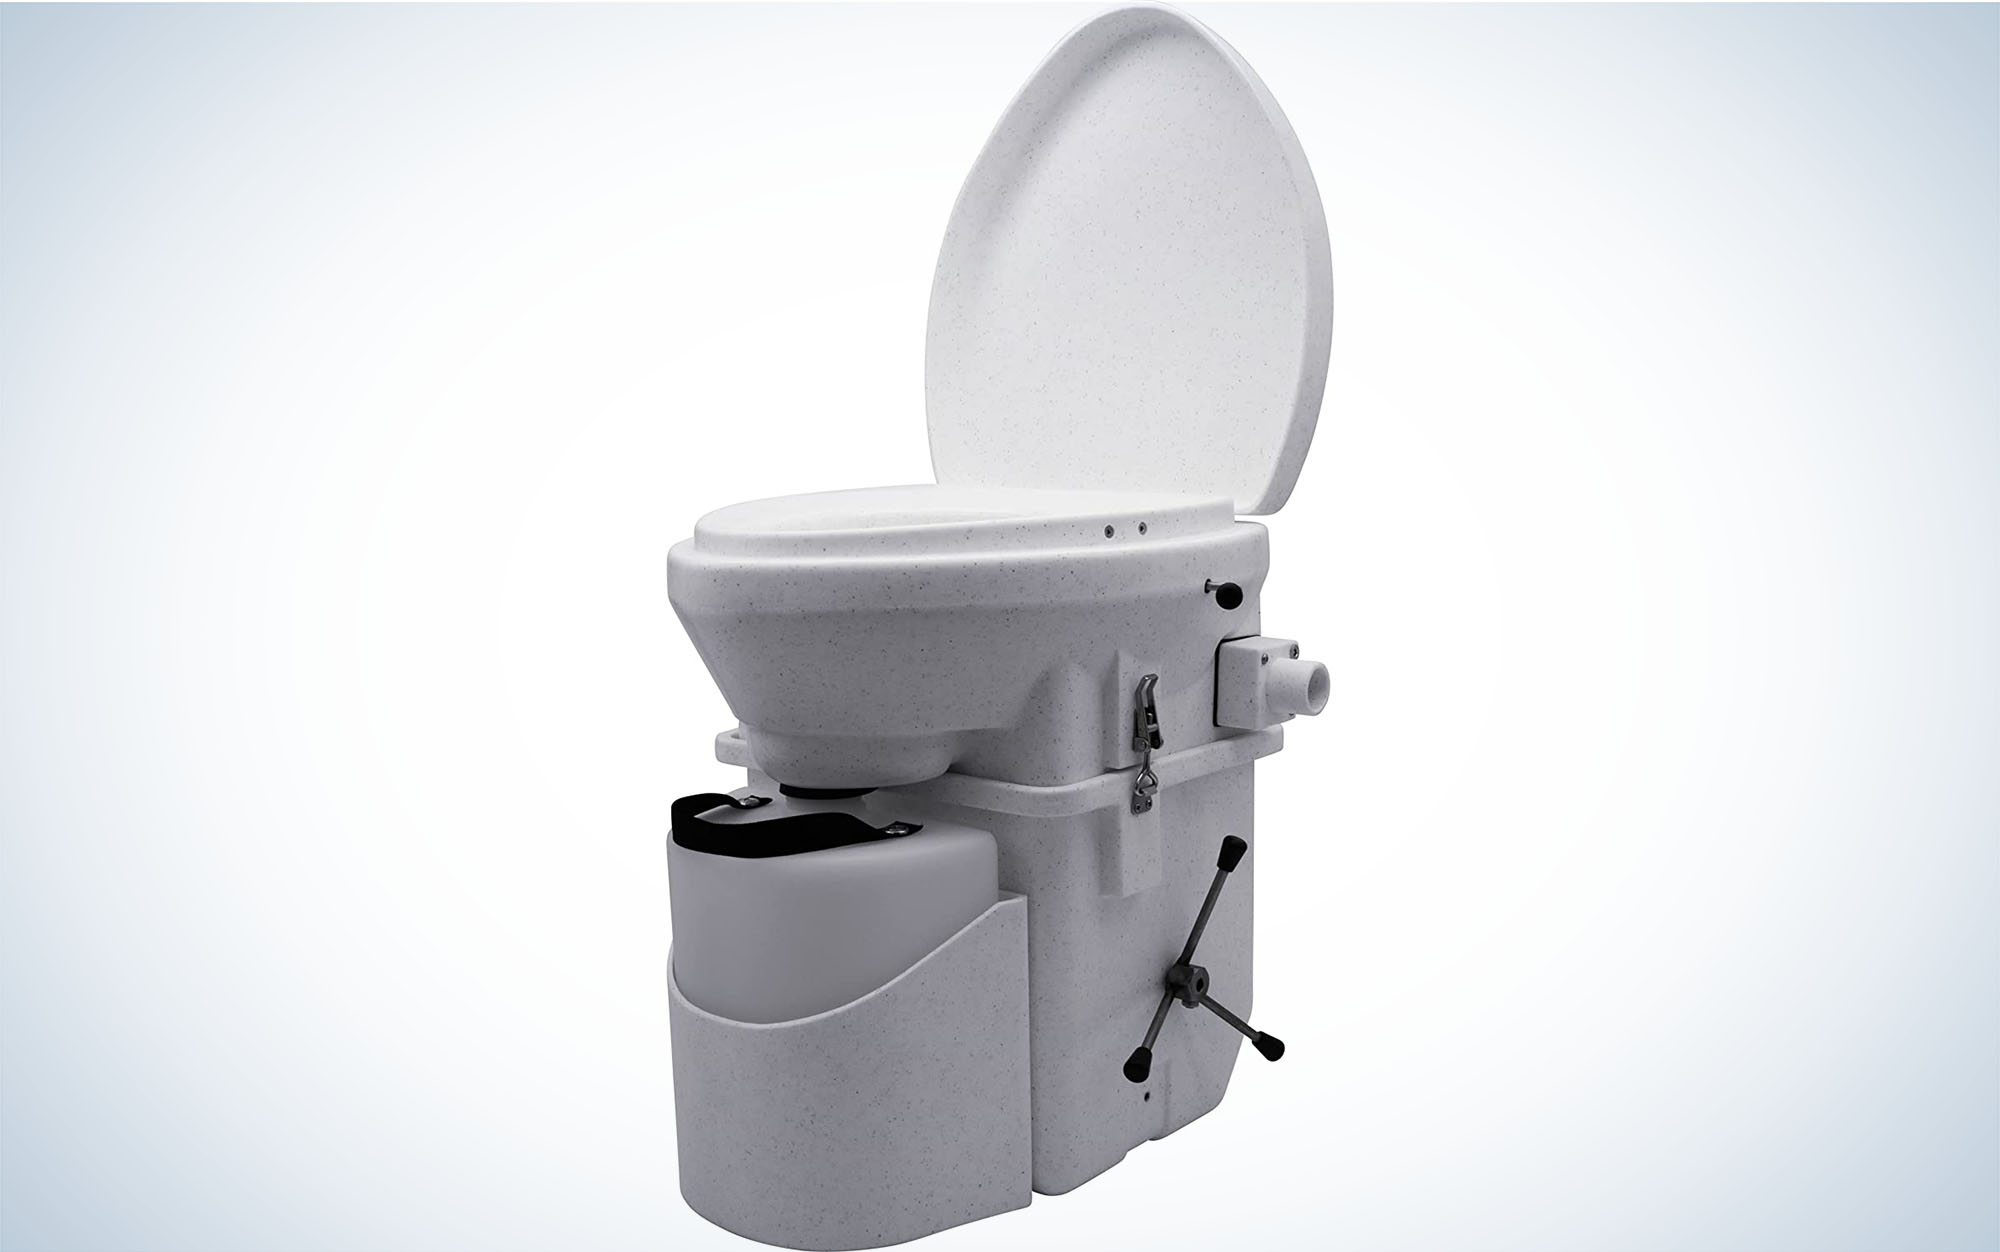 The Nature’s Head Composting Toilet is the best overall.